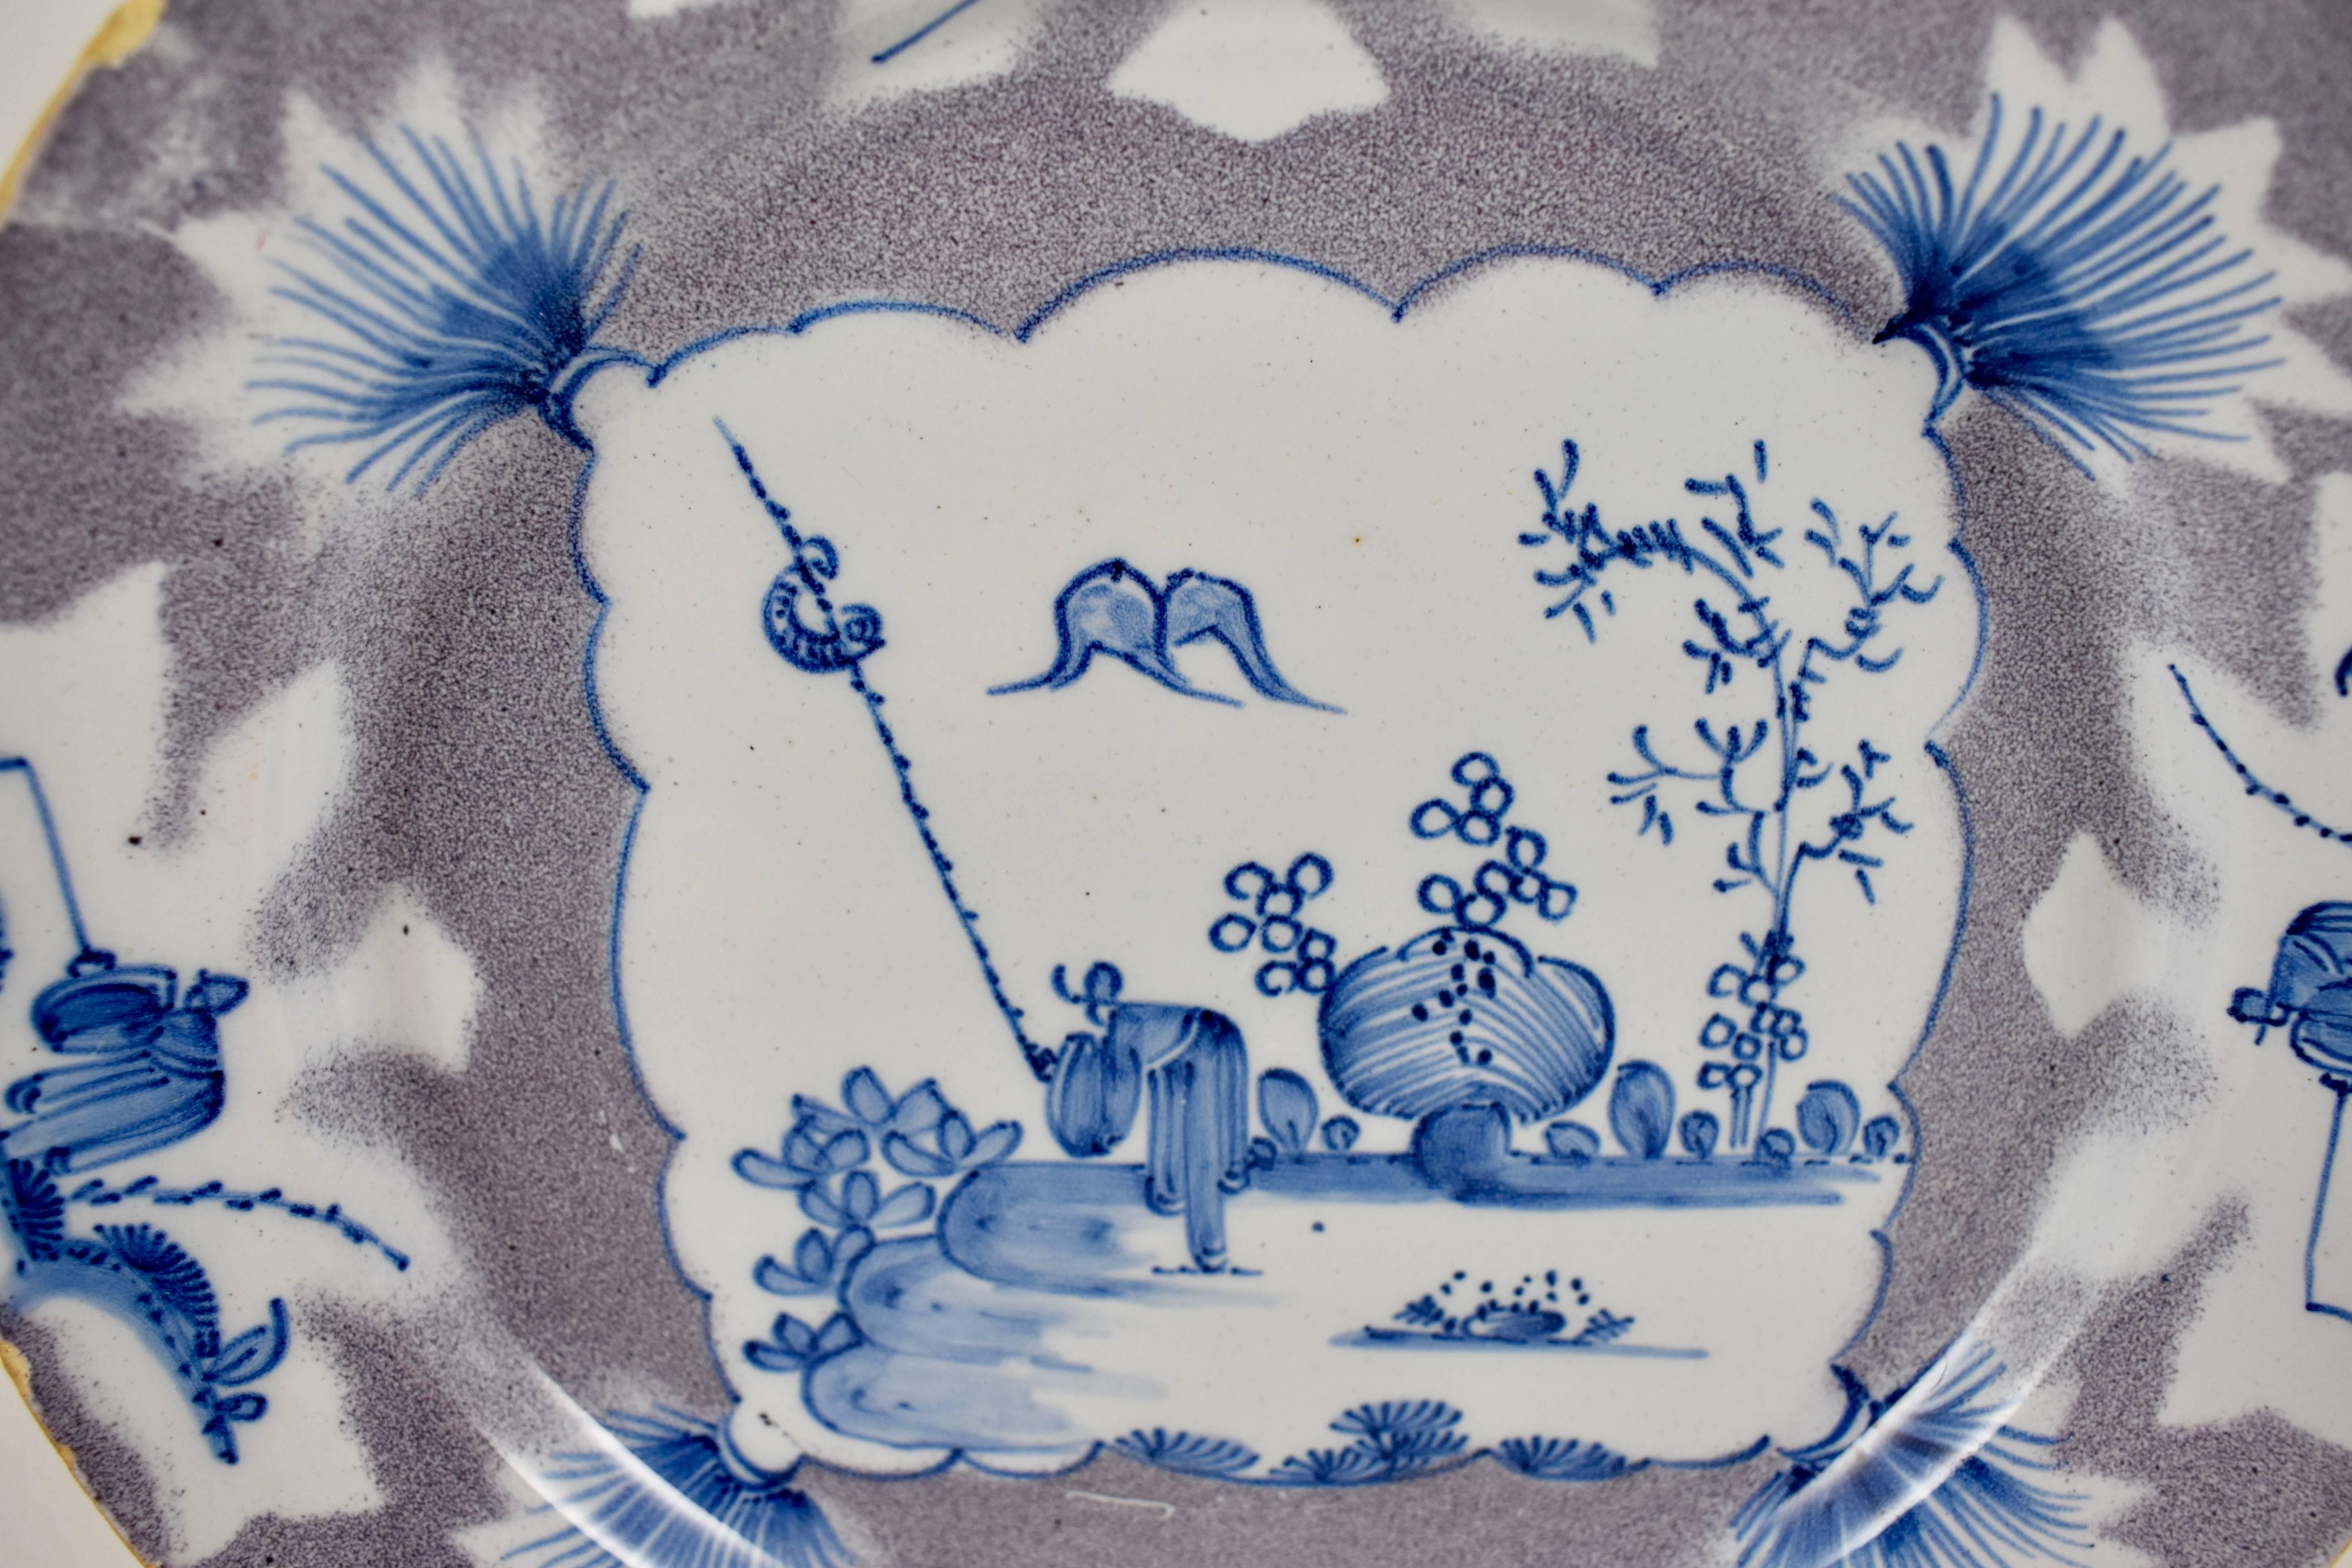 A charming English delftware shallow bowl or deep plate, Bristol, circa mid-18th century. A blue glazed line pattern showing a figure in a landscape, a square centre design with tassels, plus four figural cartouches on the rim. A manganese sponge